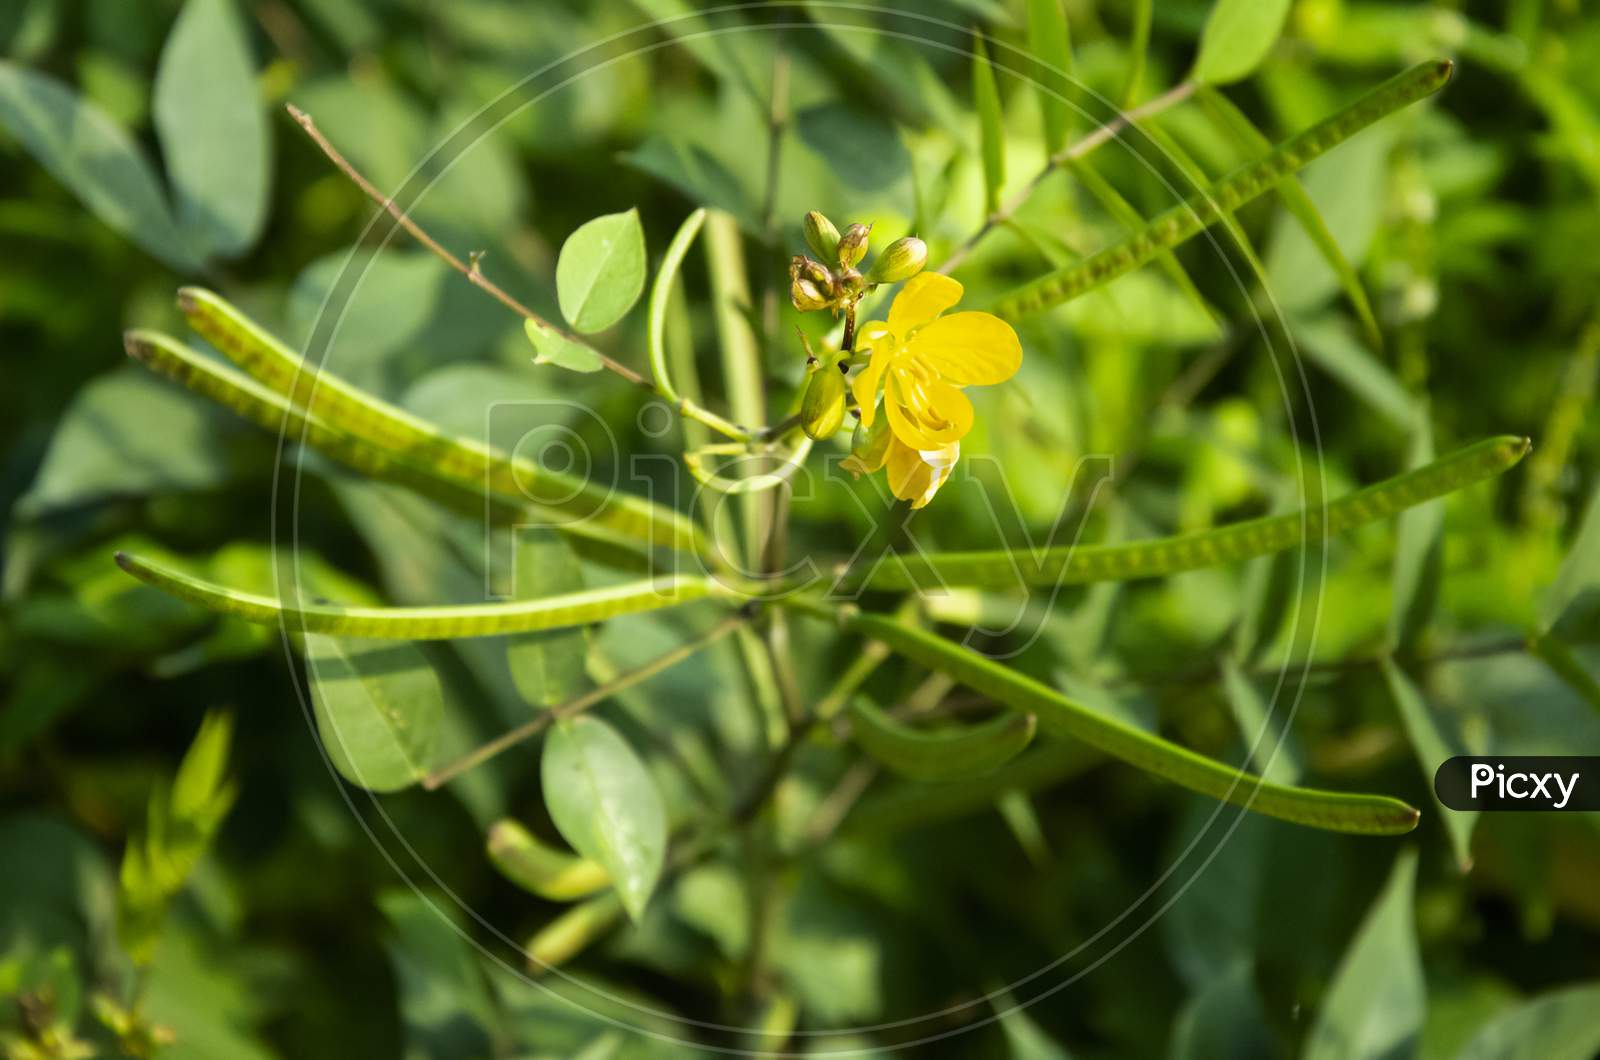 Selective focus on SENNA OCCIDENTALIS plant in the garden with blur background. Yellow flower and beans plant.